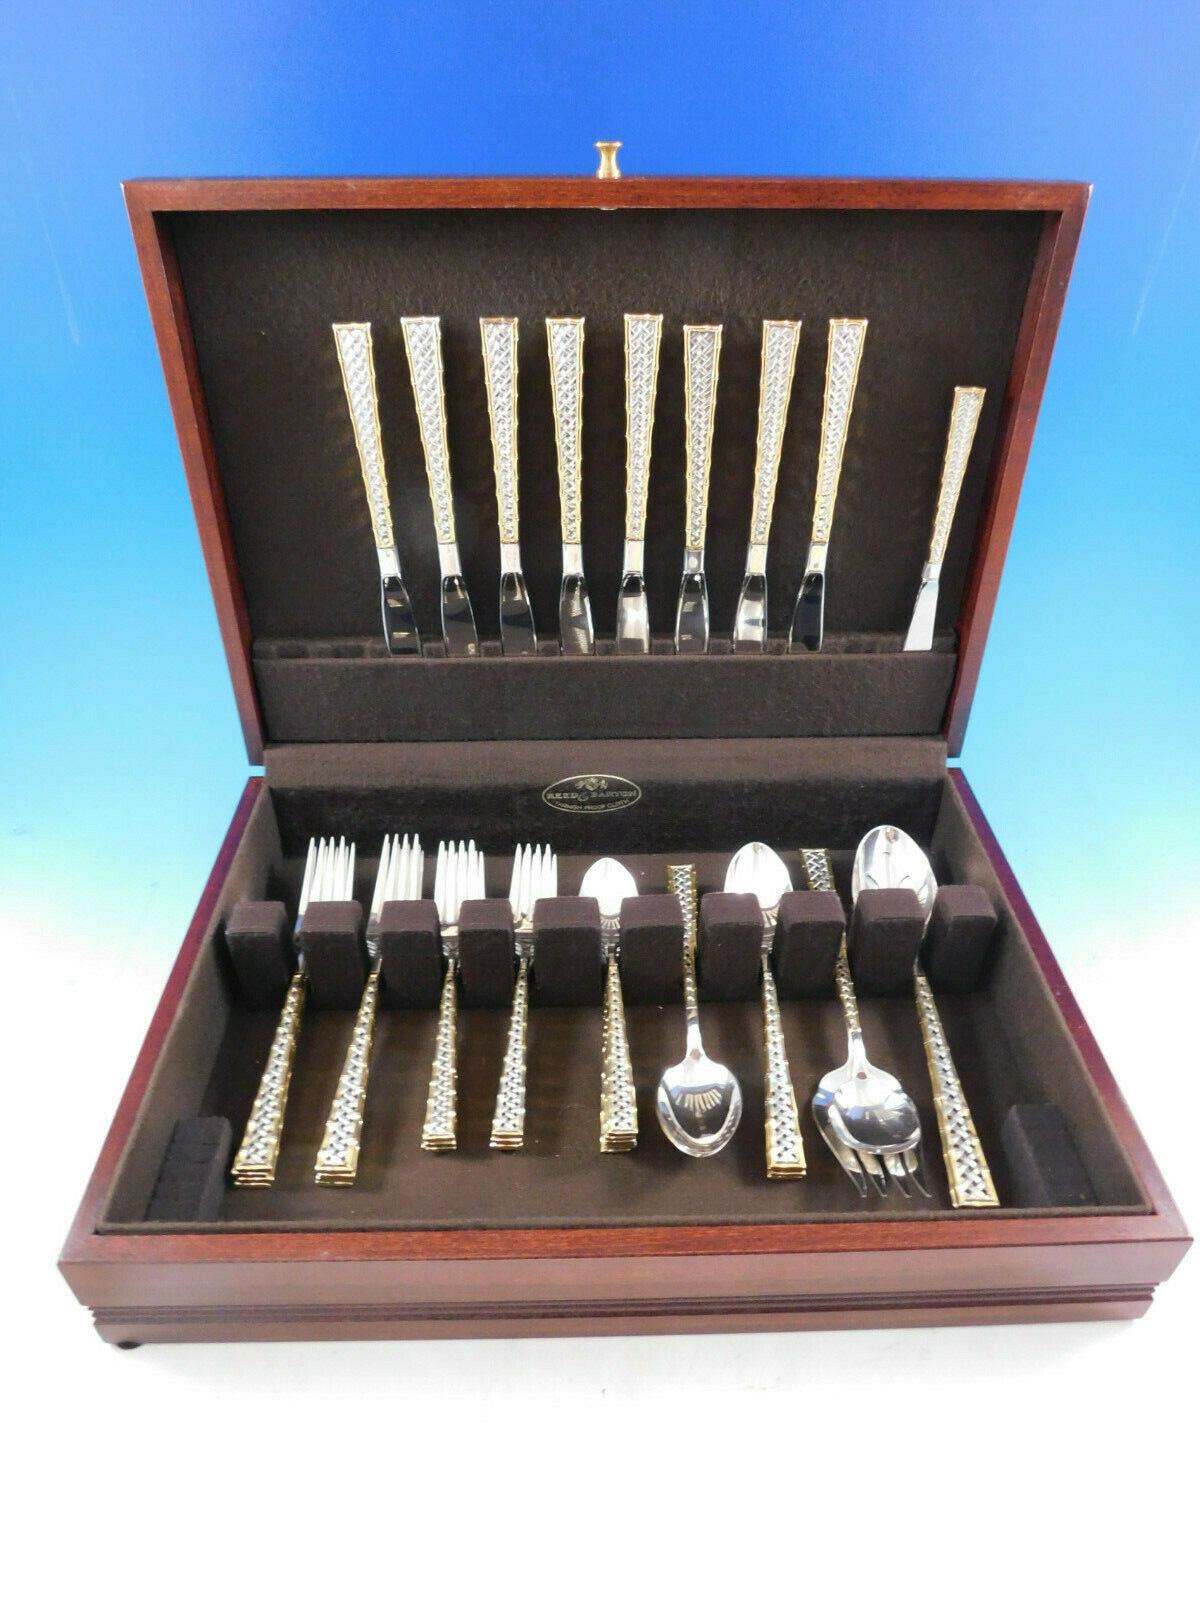 Golden Tradewinds by International sterling silver flatware set with basket weave design and bamboo detailing in gold accent, 45 pieces. This set includes:

8 Knives, 8 3/4